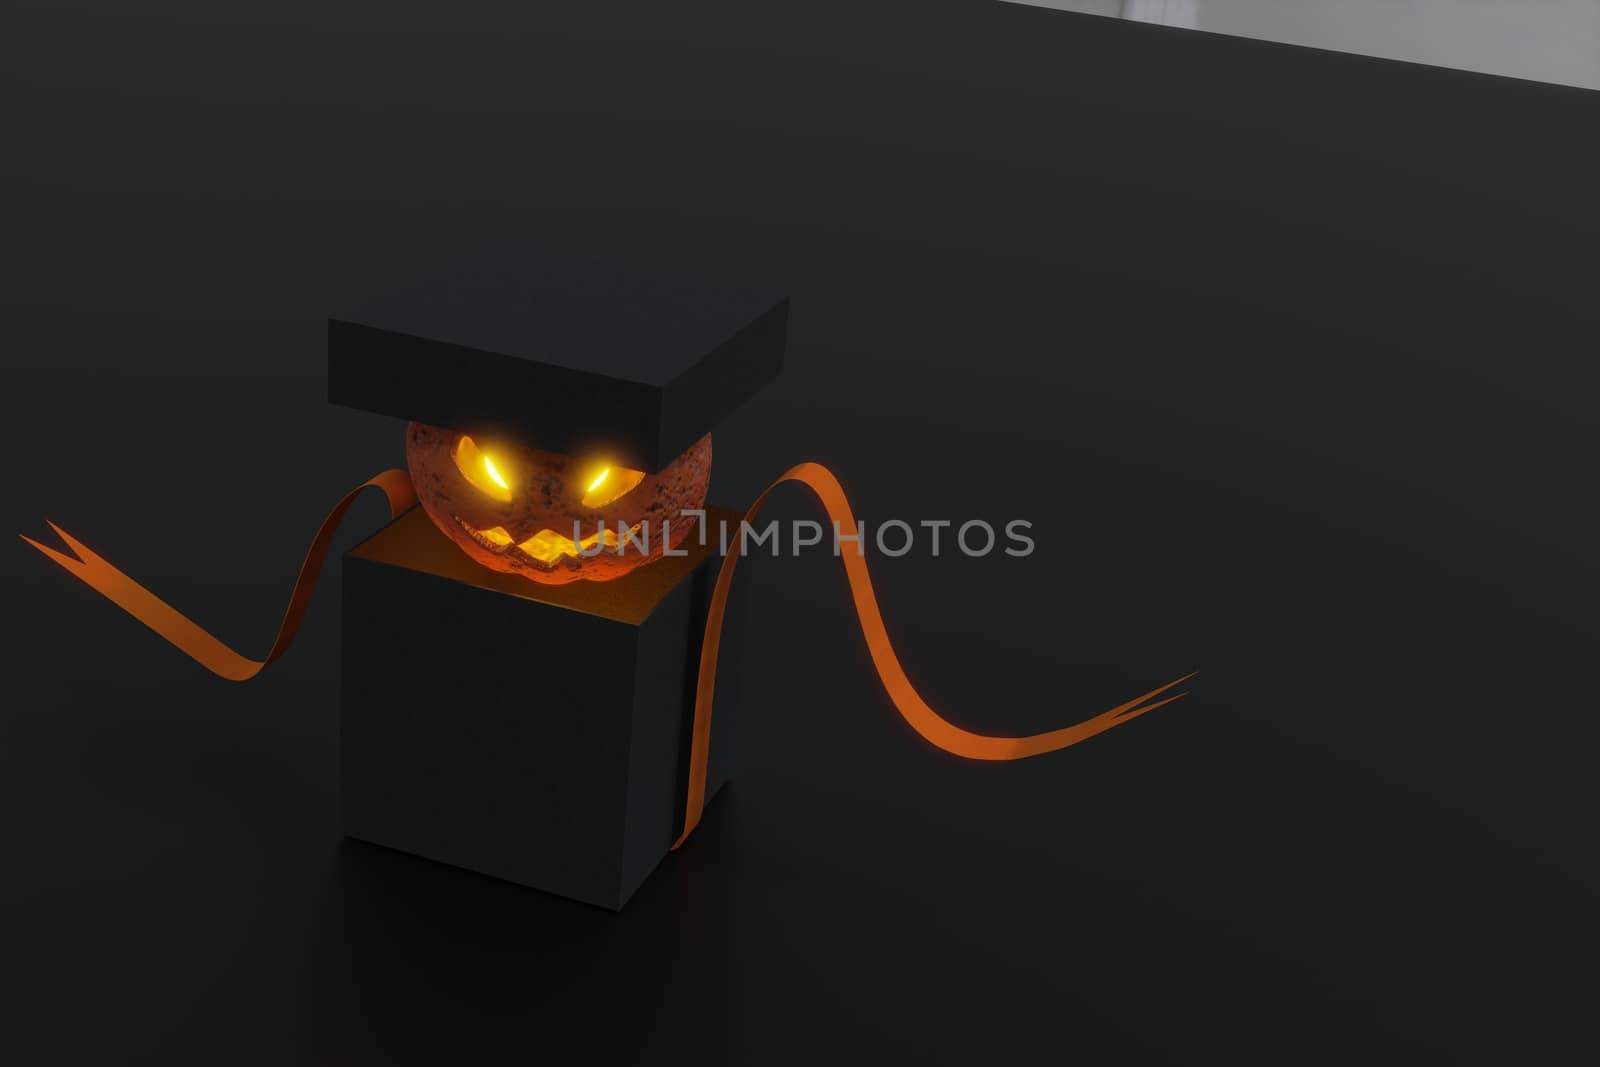 3d rendering ,  Halloween pumpkin in mysterious black box , Concept open gift box and pumpkin ghost or jack-o'-lantern